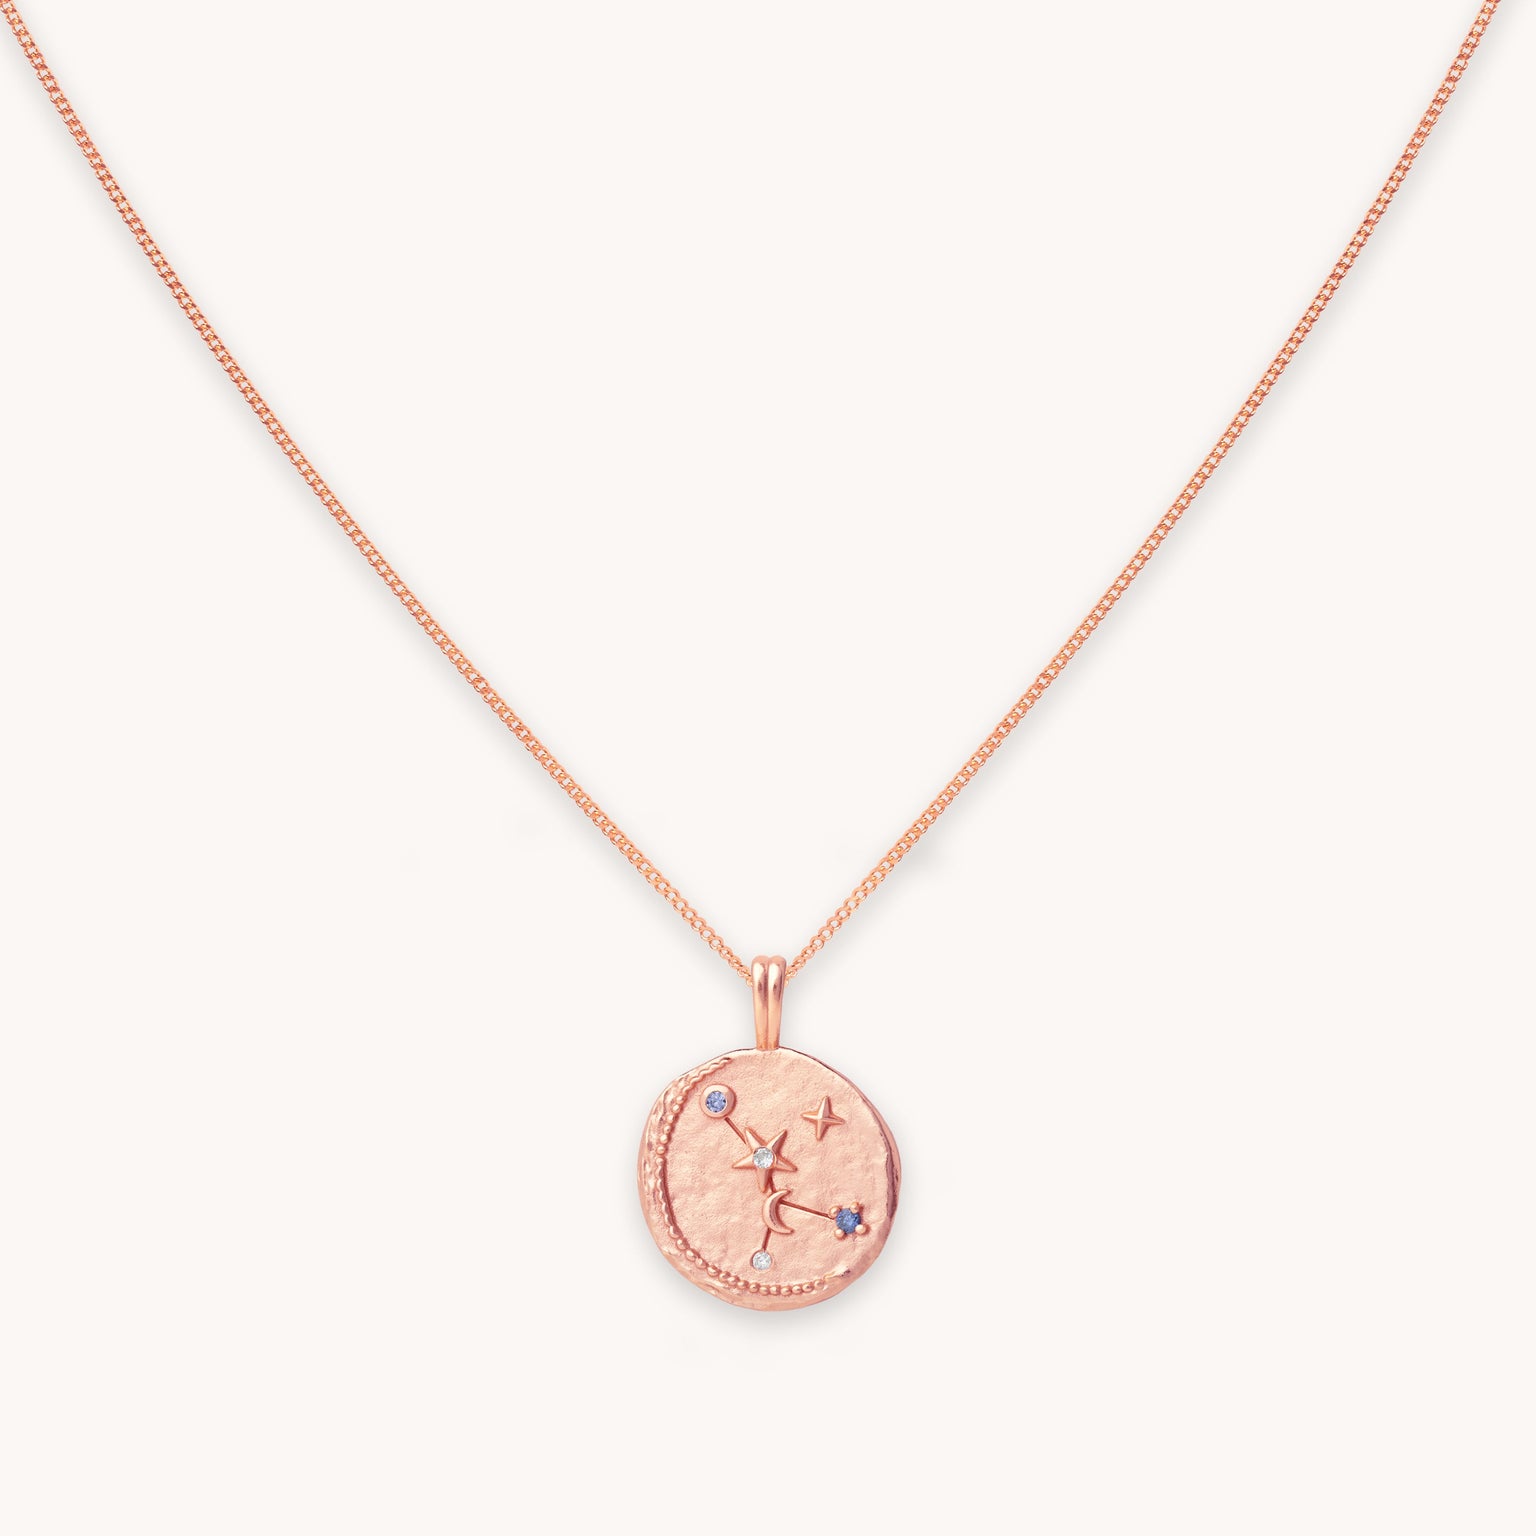 Cancer Zodiac Pendant Necklace in Rose Gold